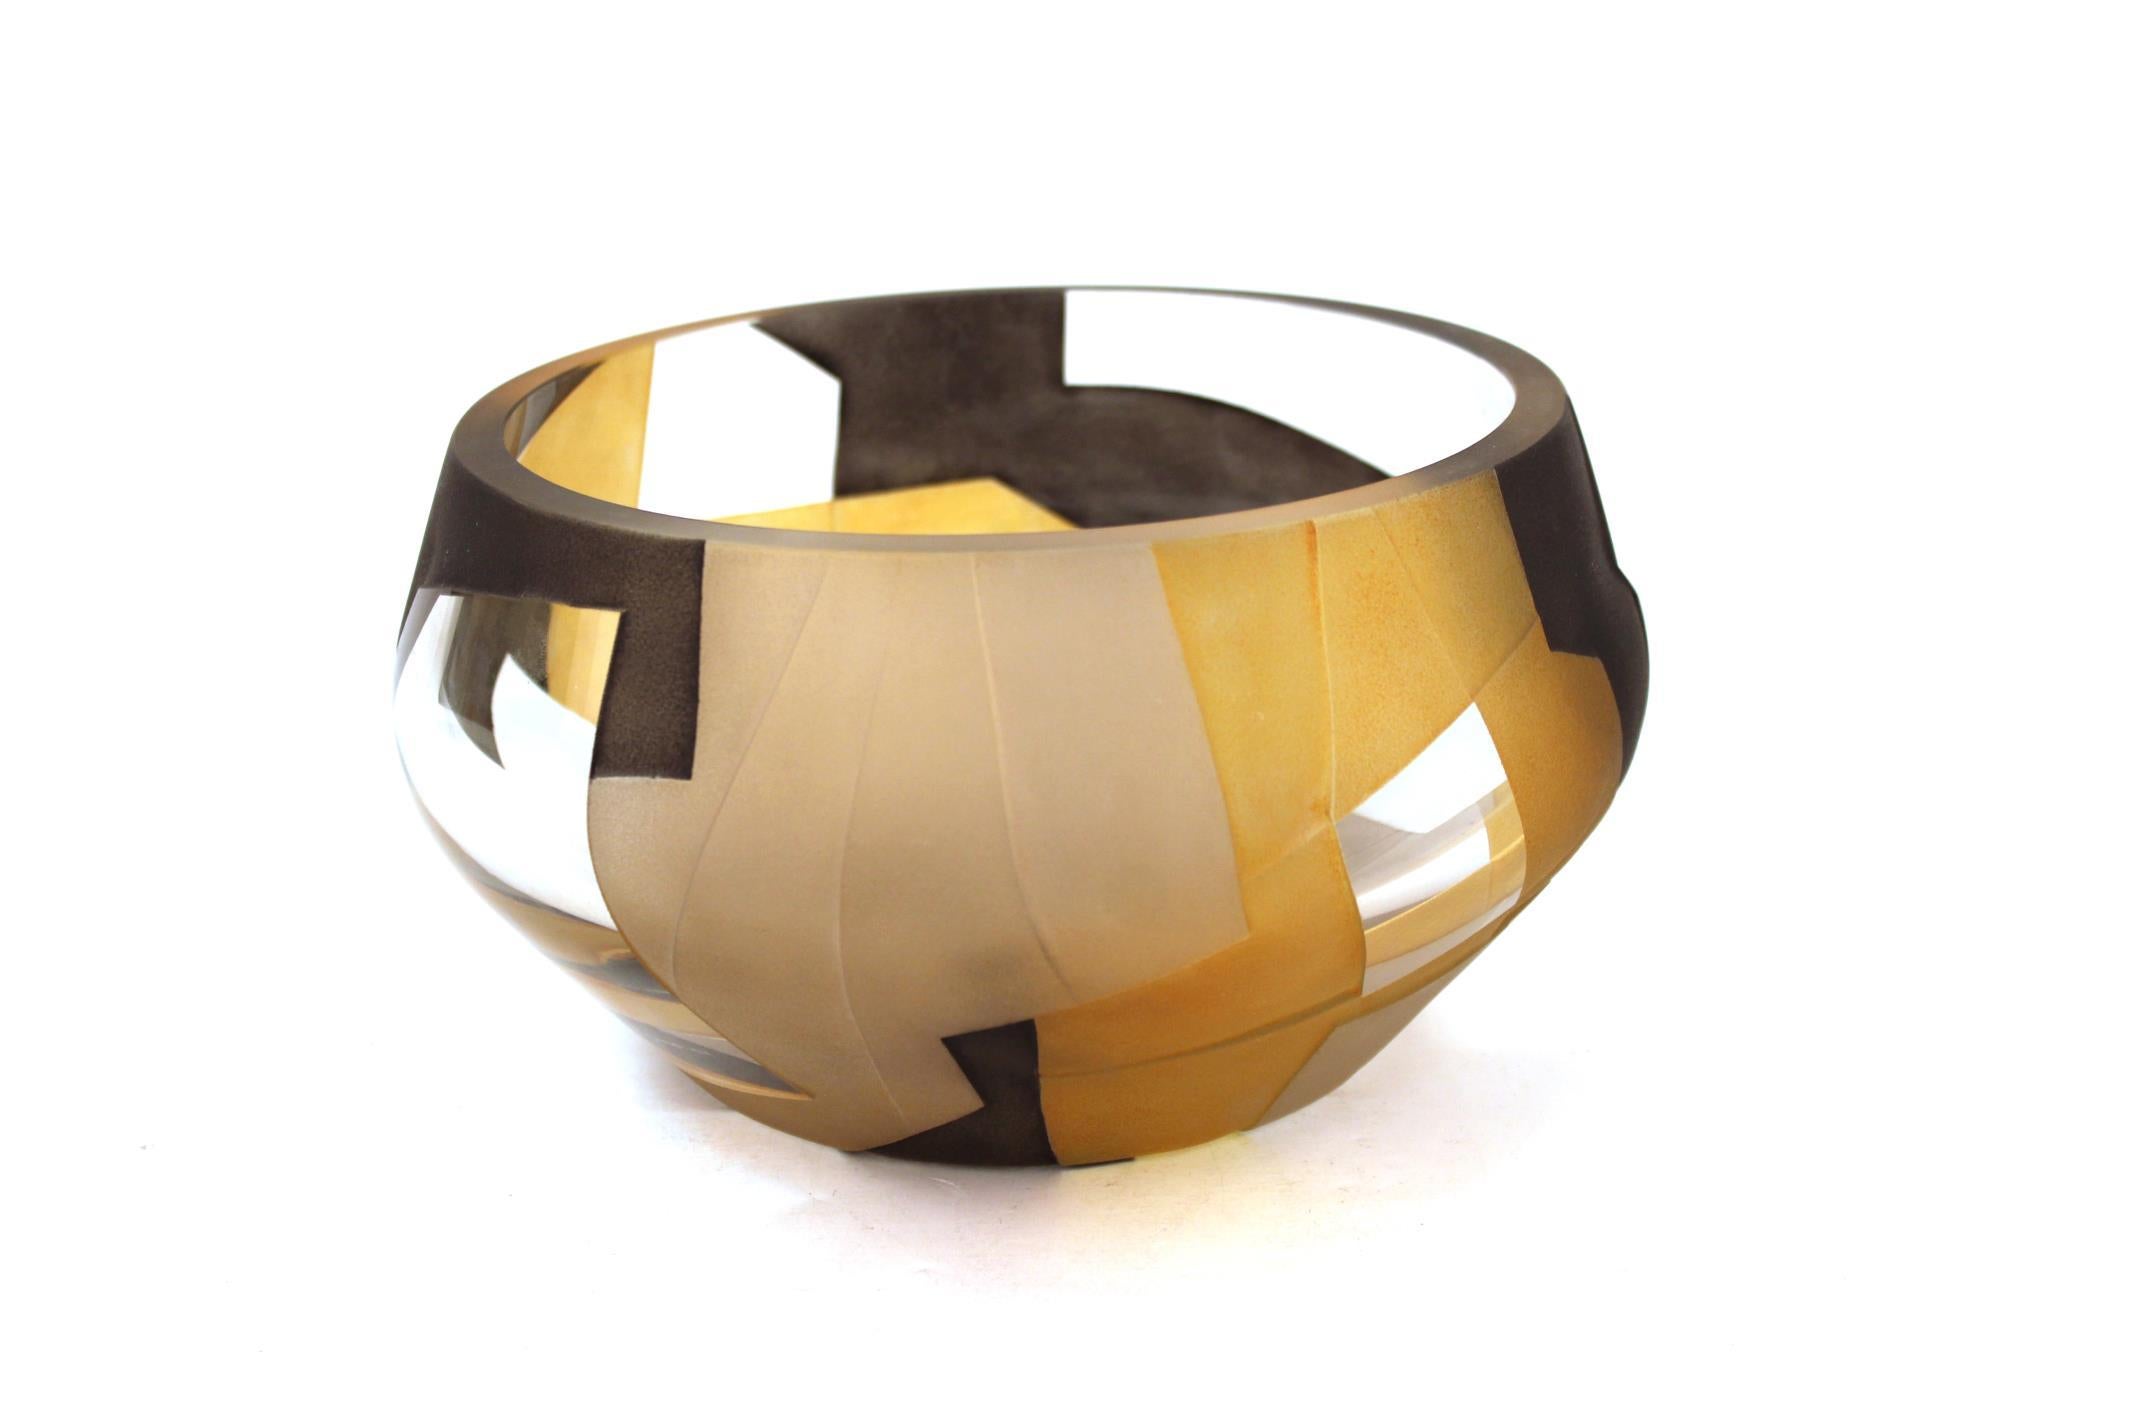 Rebecca Odom contemporary studio art glass vase in squat form with sand-blasted geometric motif in black and gold. Etched makers mark on bottom.